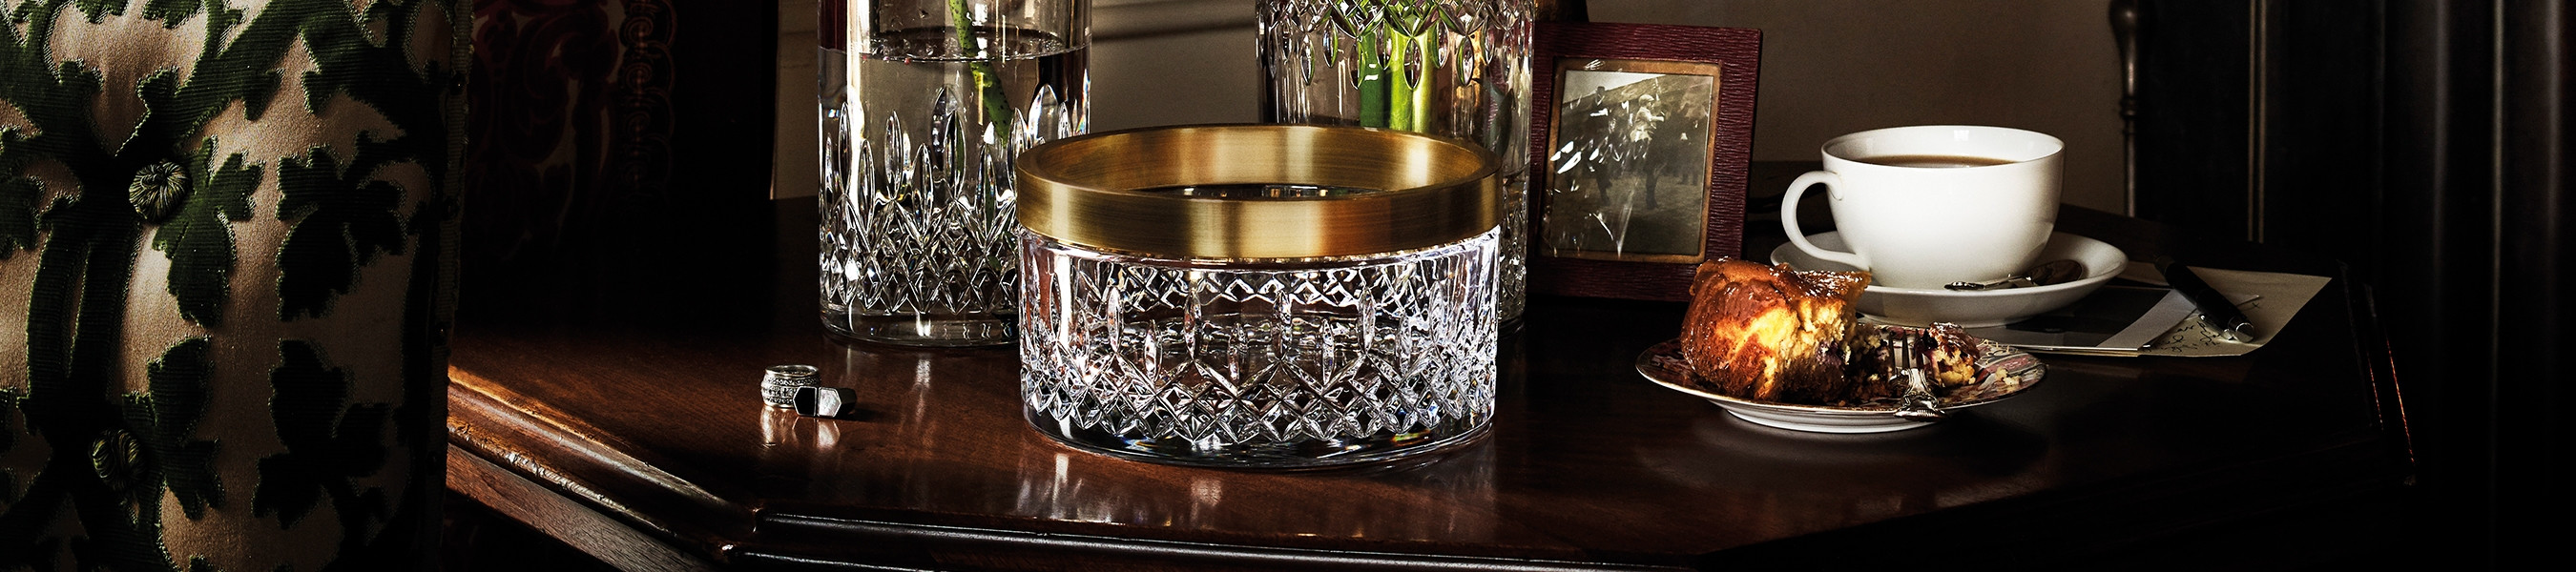 14 Spectacular Waterford Lismore Castle Vase 2024 free download waterford lismore castle vase of crystal bowls centerpieces waterforda us within waterford crystal bowls centerpieces